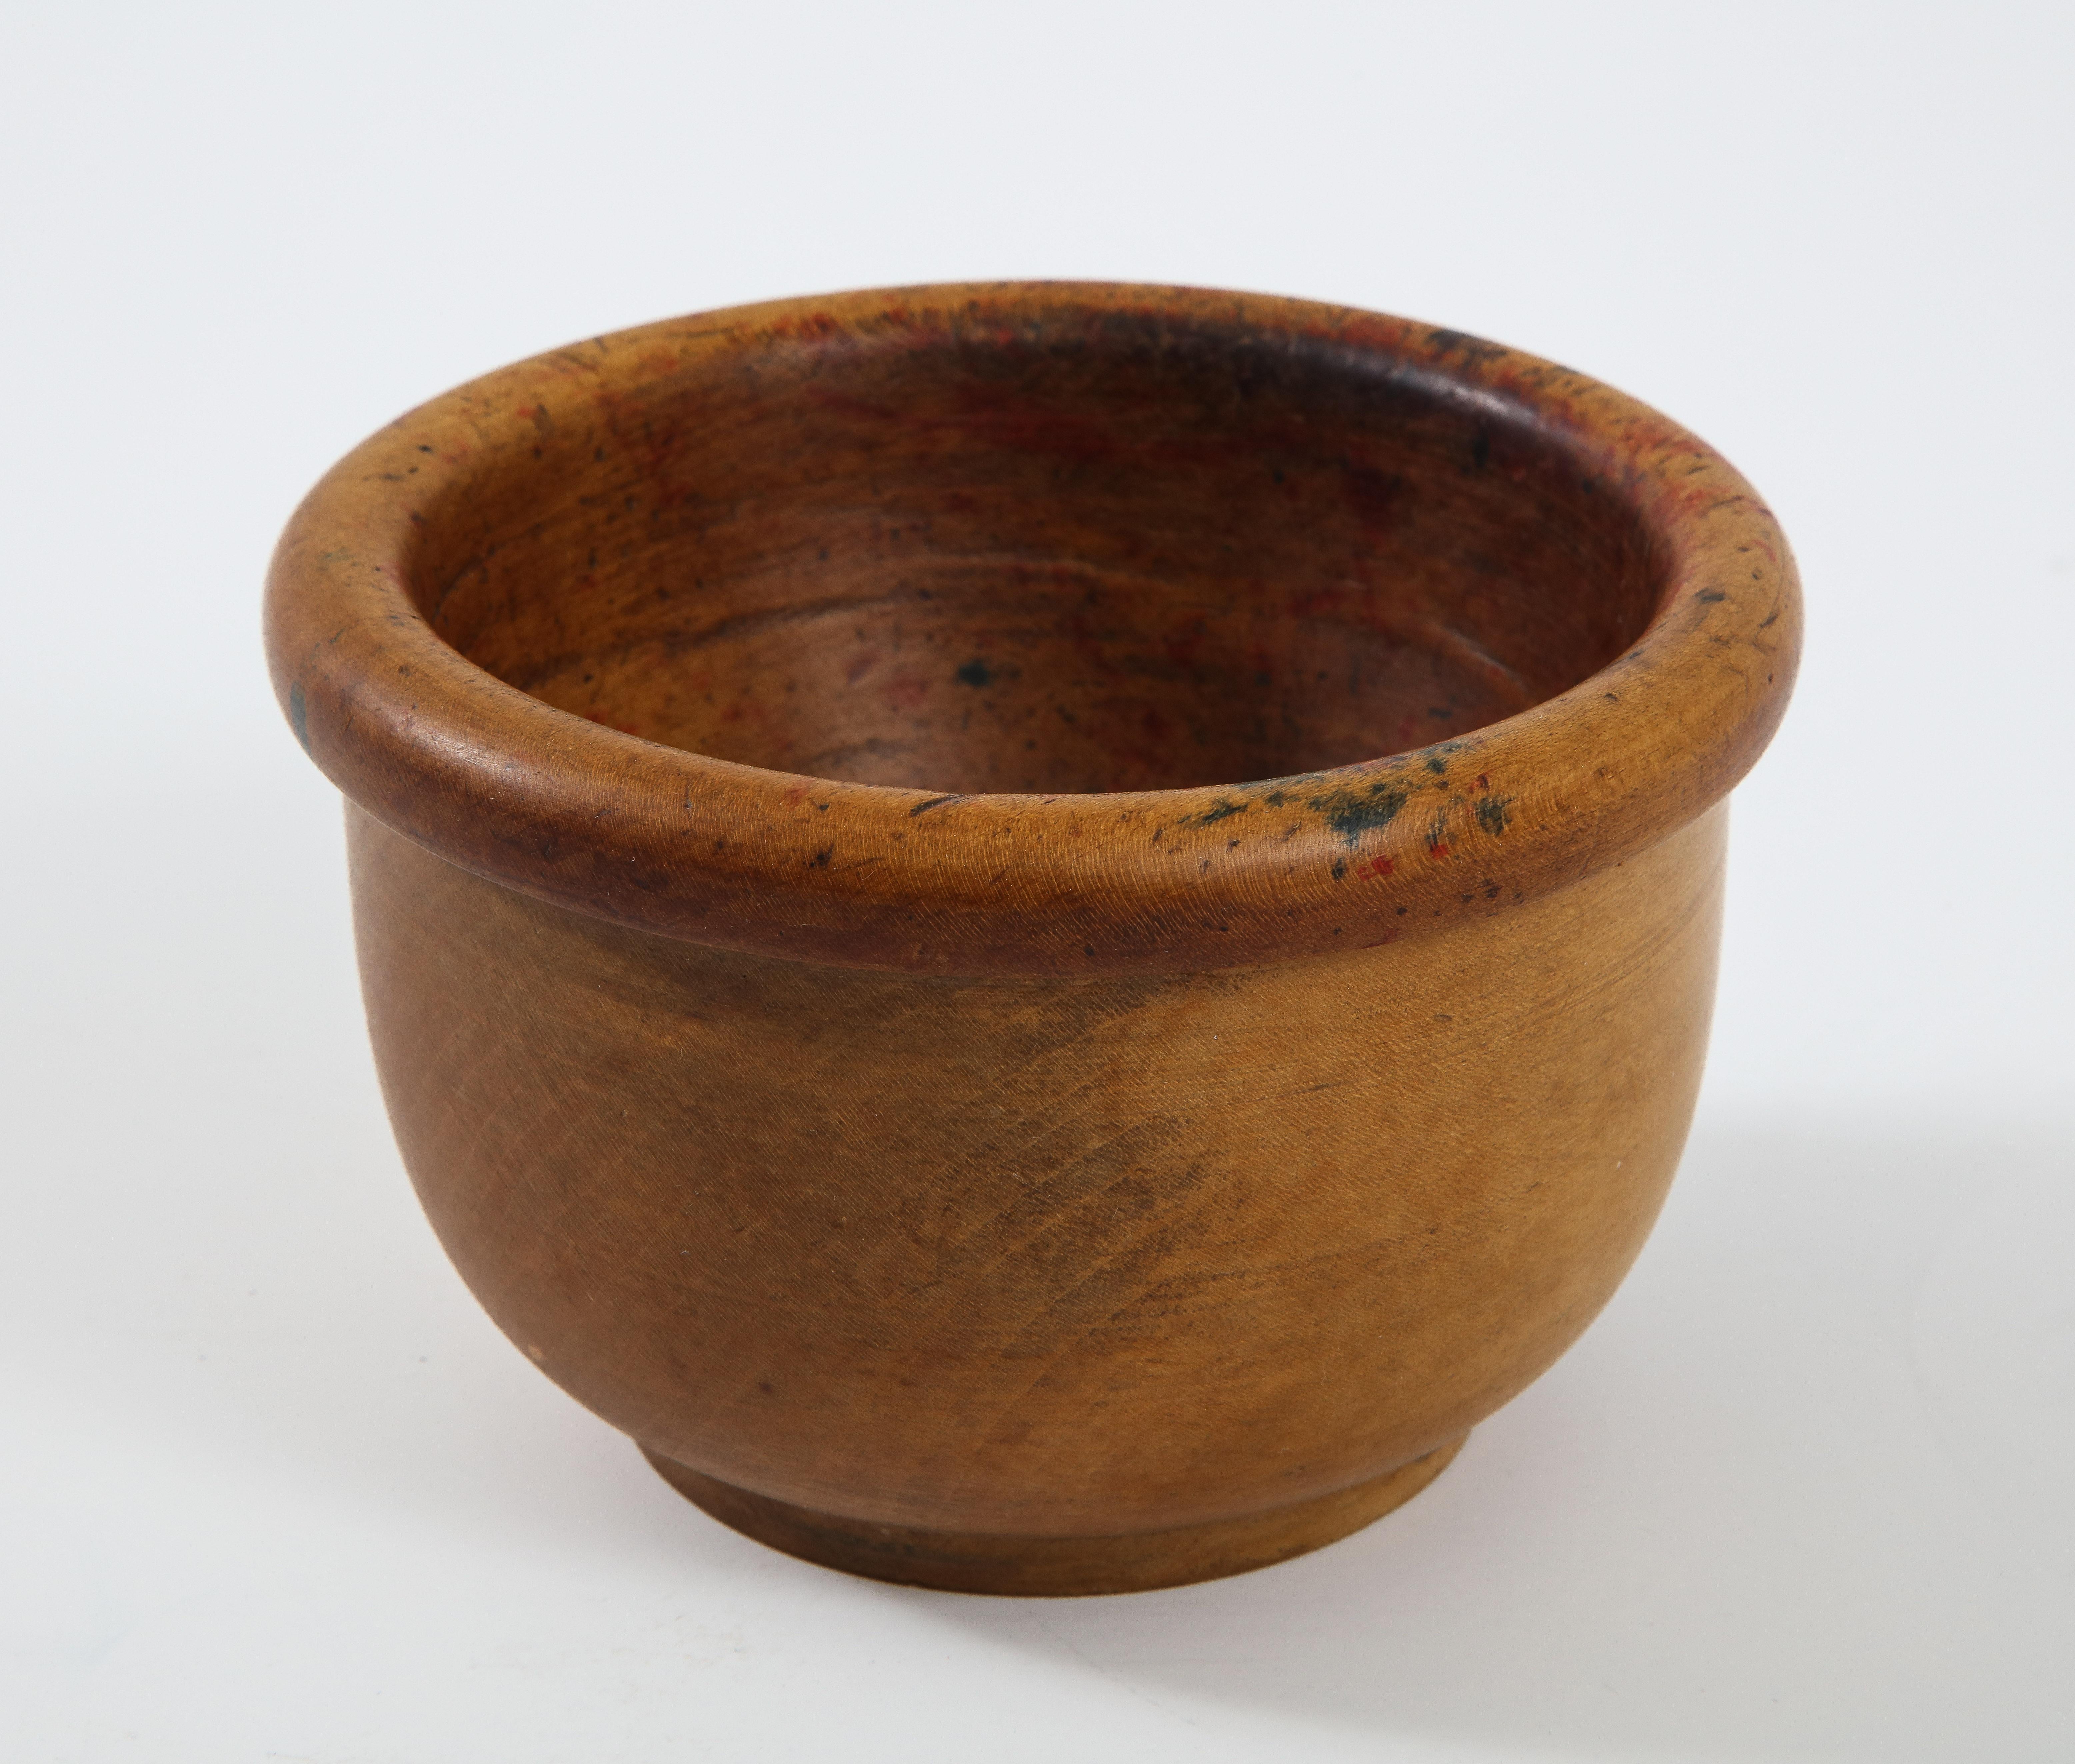 Hand-turned American wood bowl from one piece of wood.